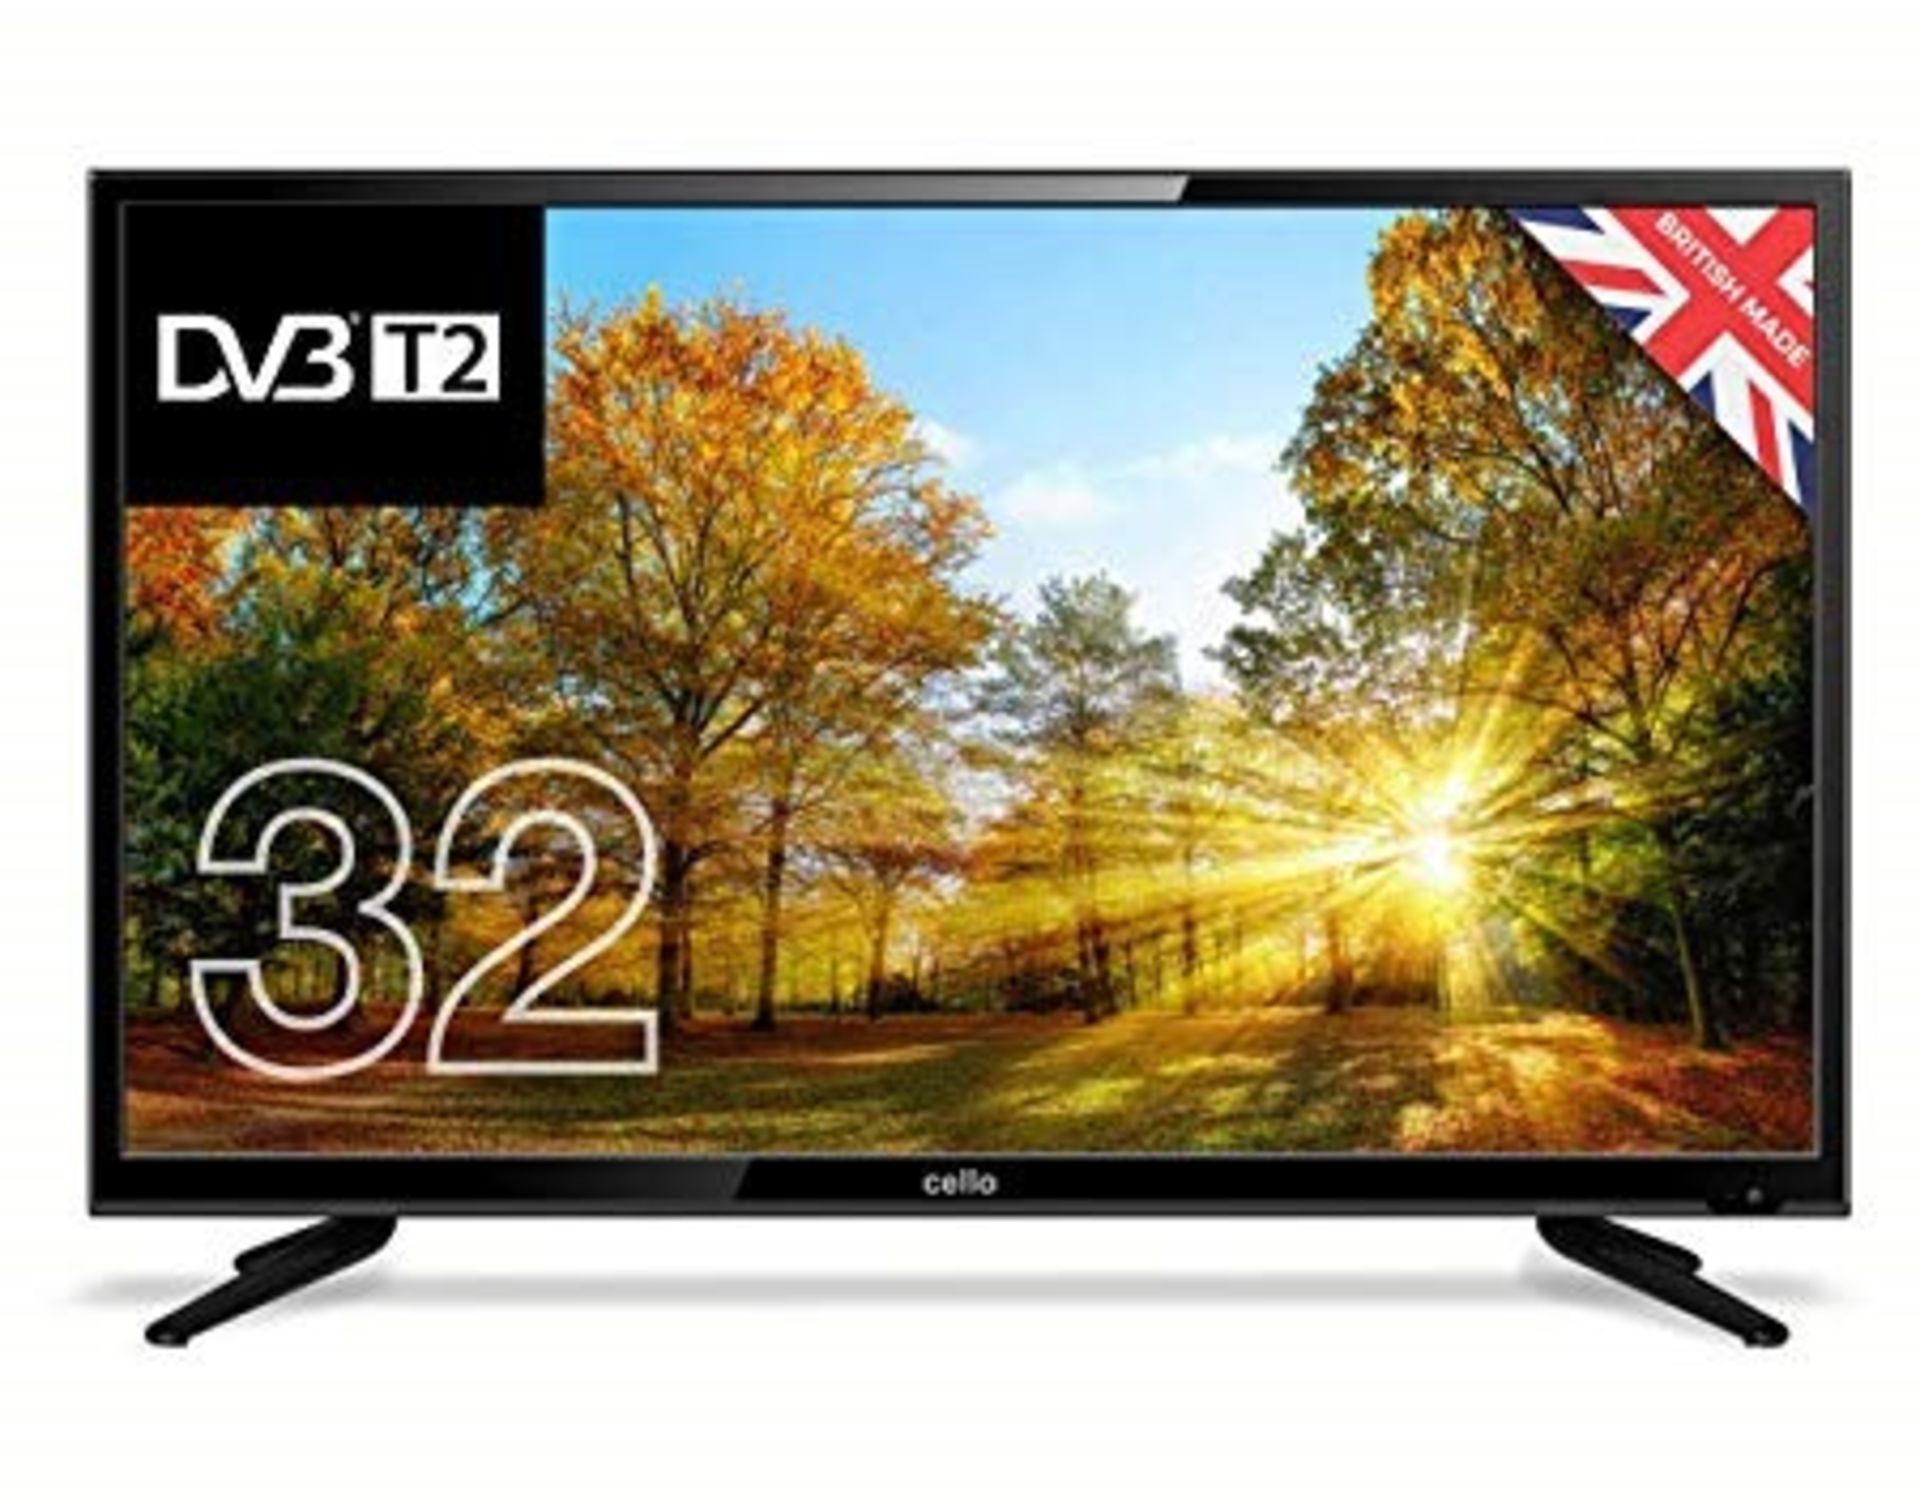 1 BOXED TESTED AND WORKING CELLO 32" LED SMART TV WITH AN INTEGRATED DVD PLAYER - C32227FT2 / RRP £